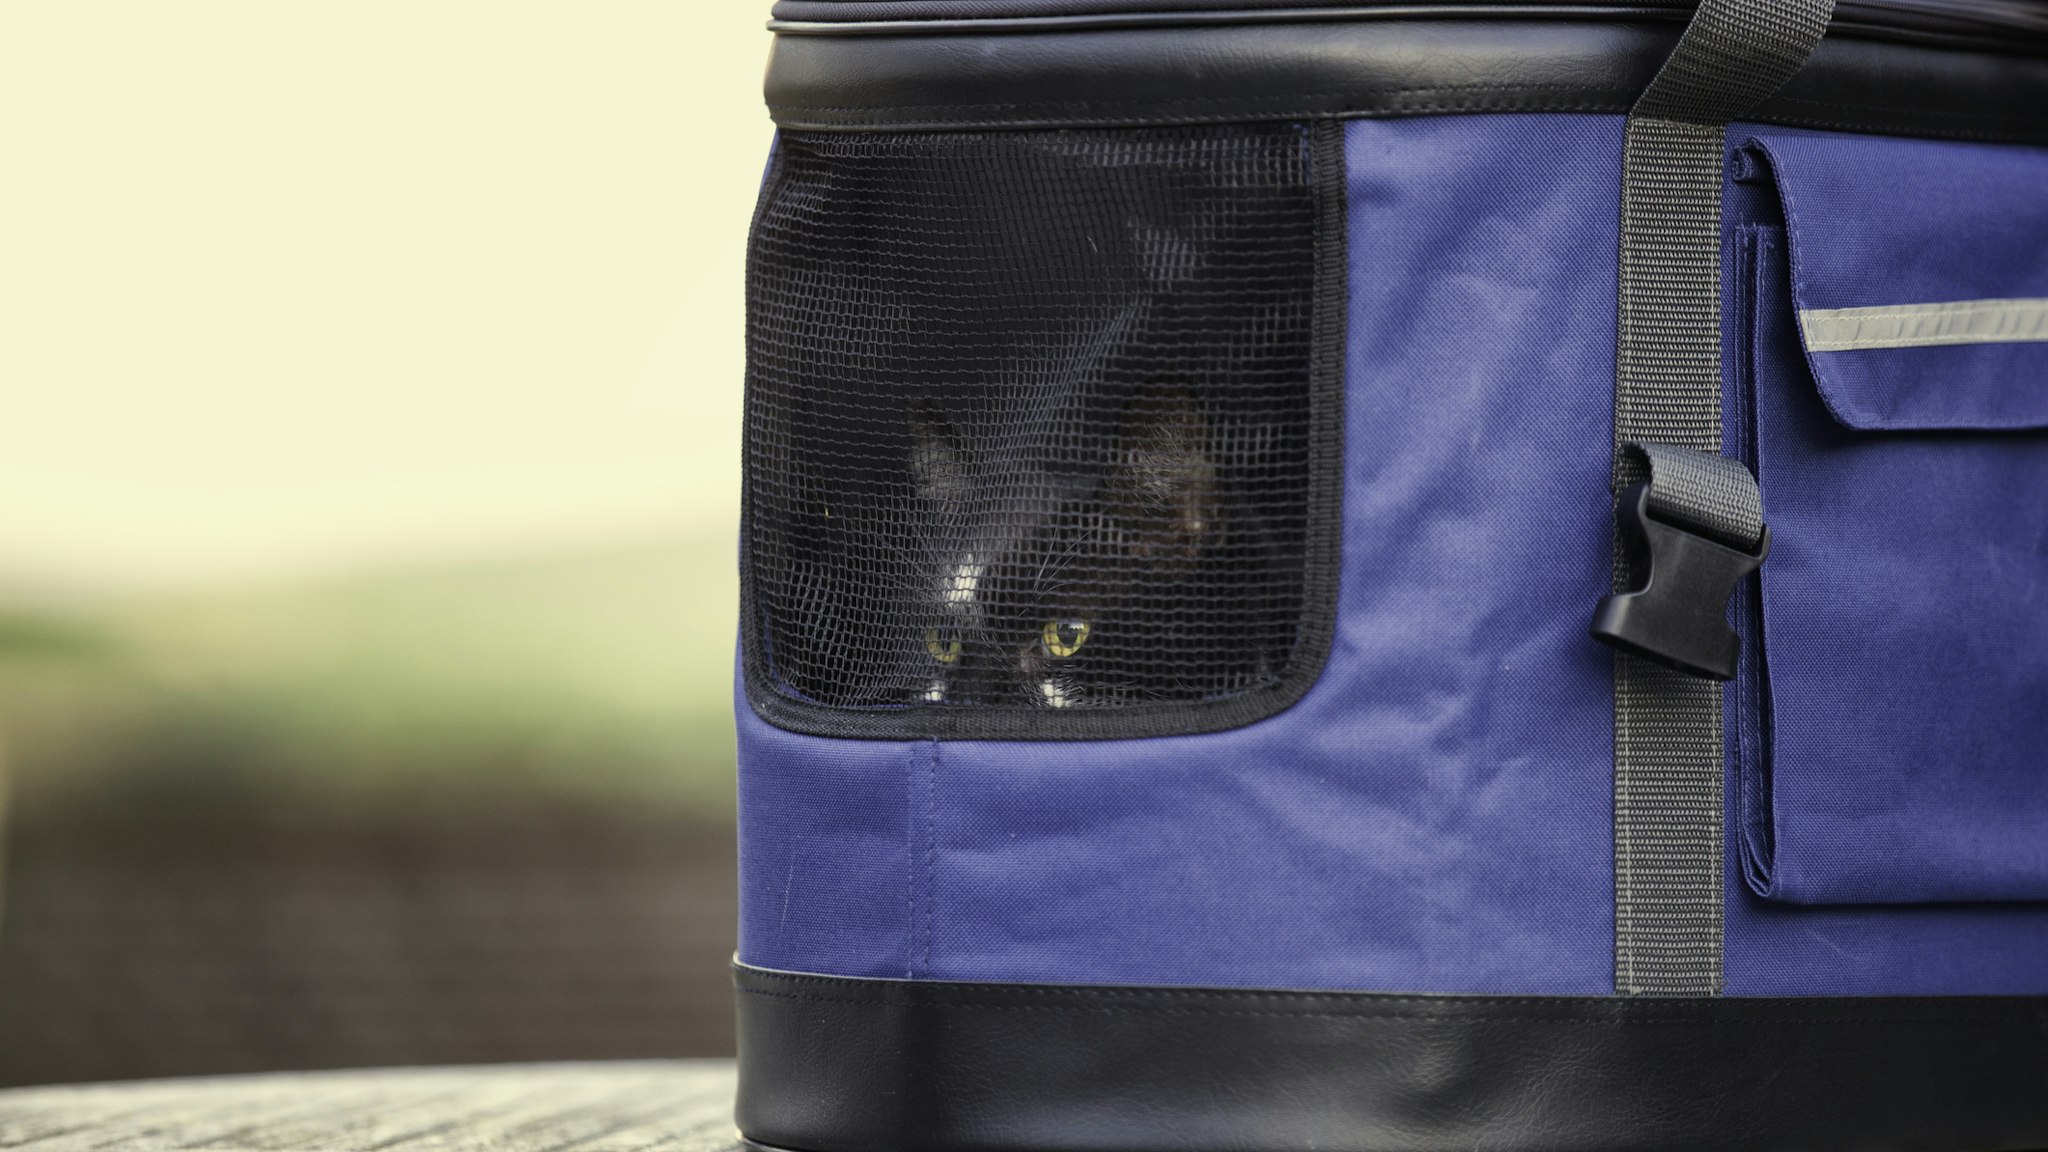 Cat arrives at new home in a pet carrier - stock photo